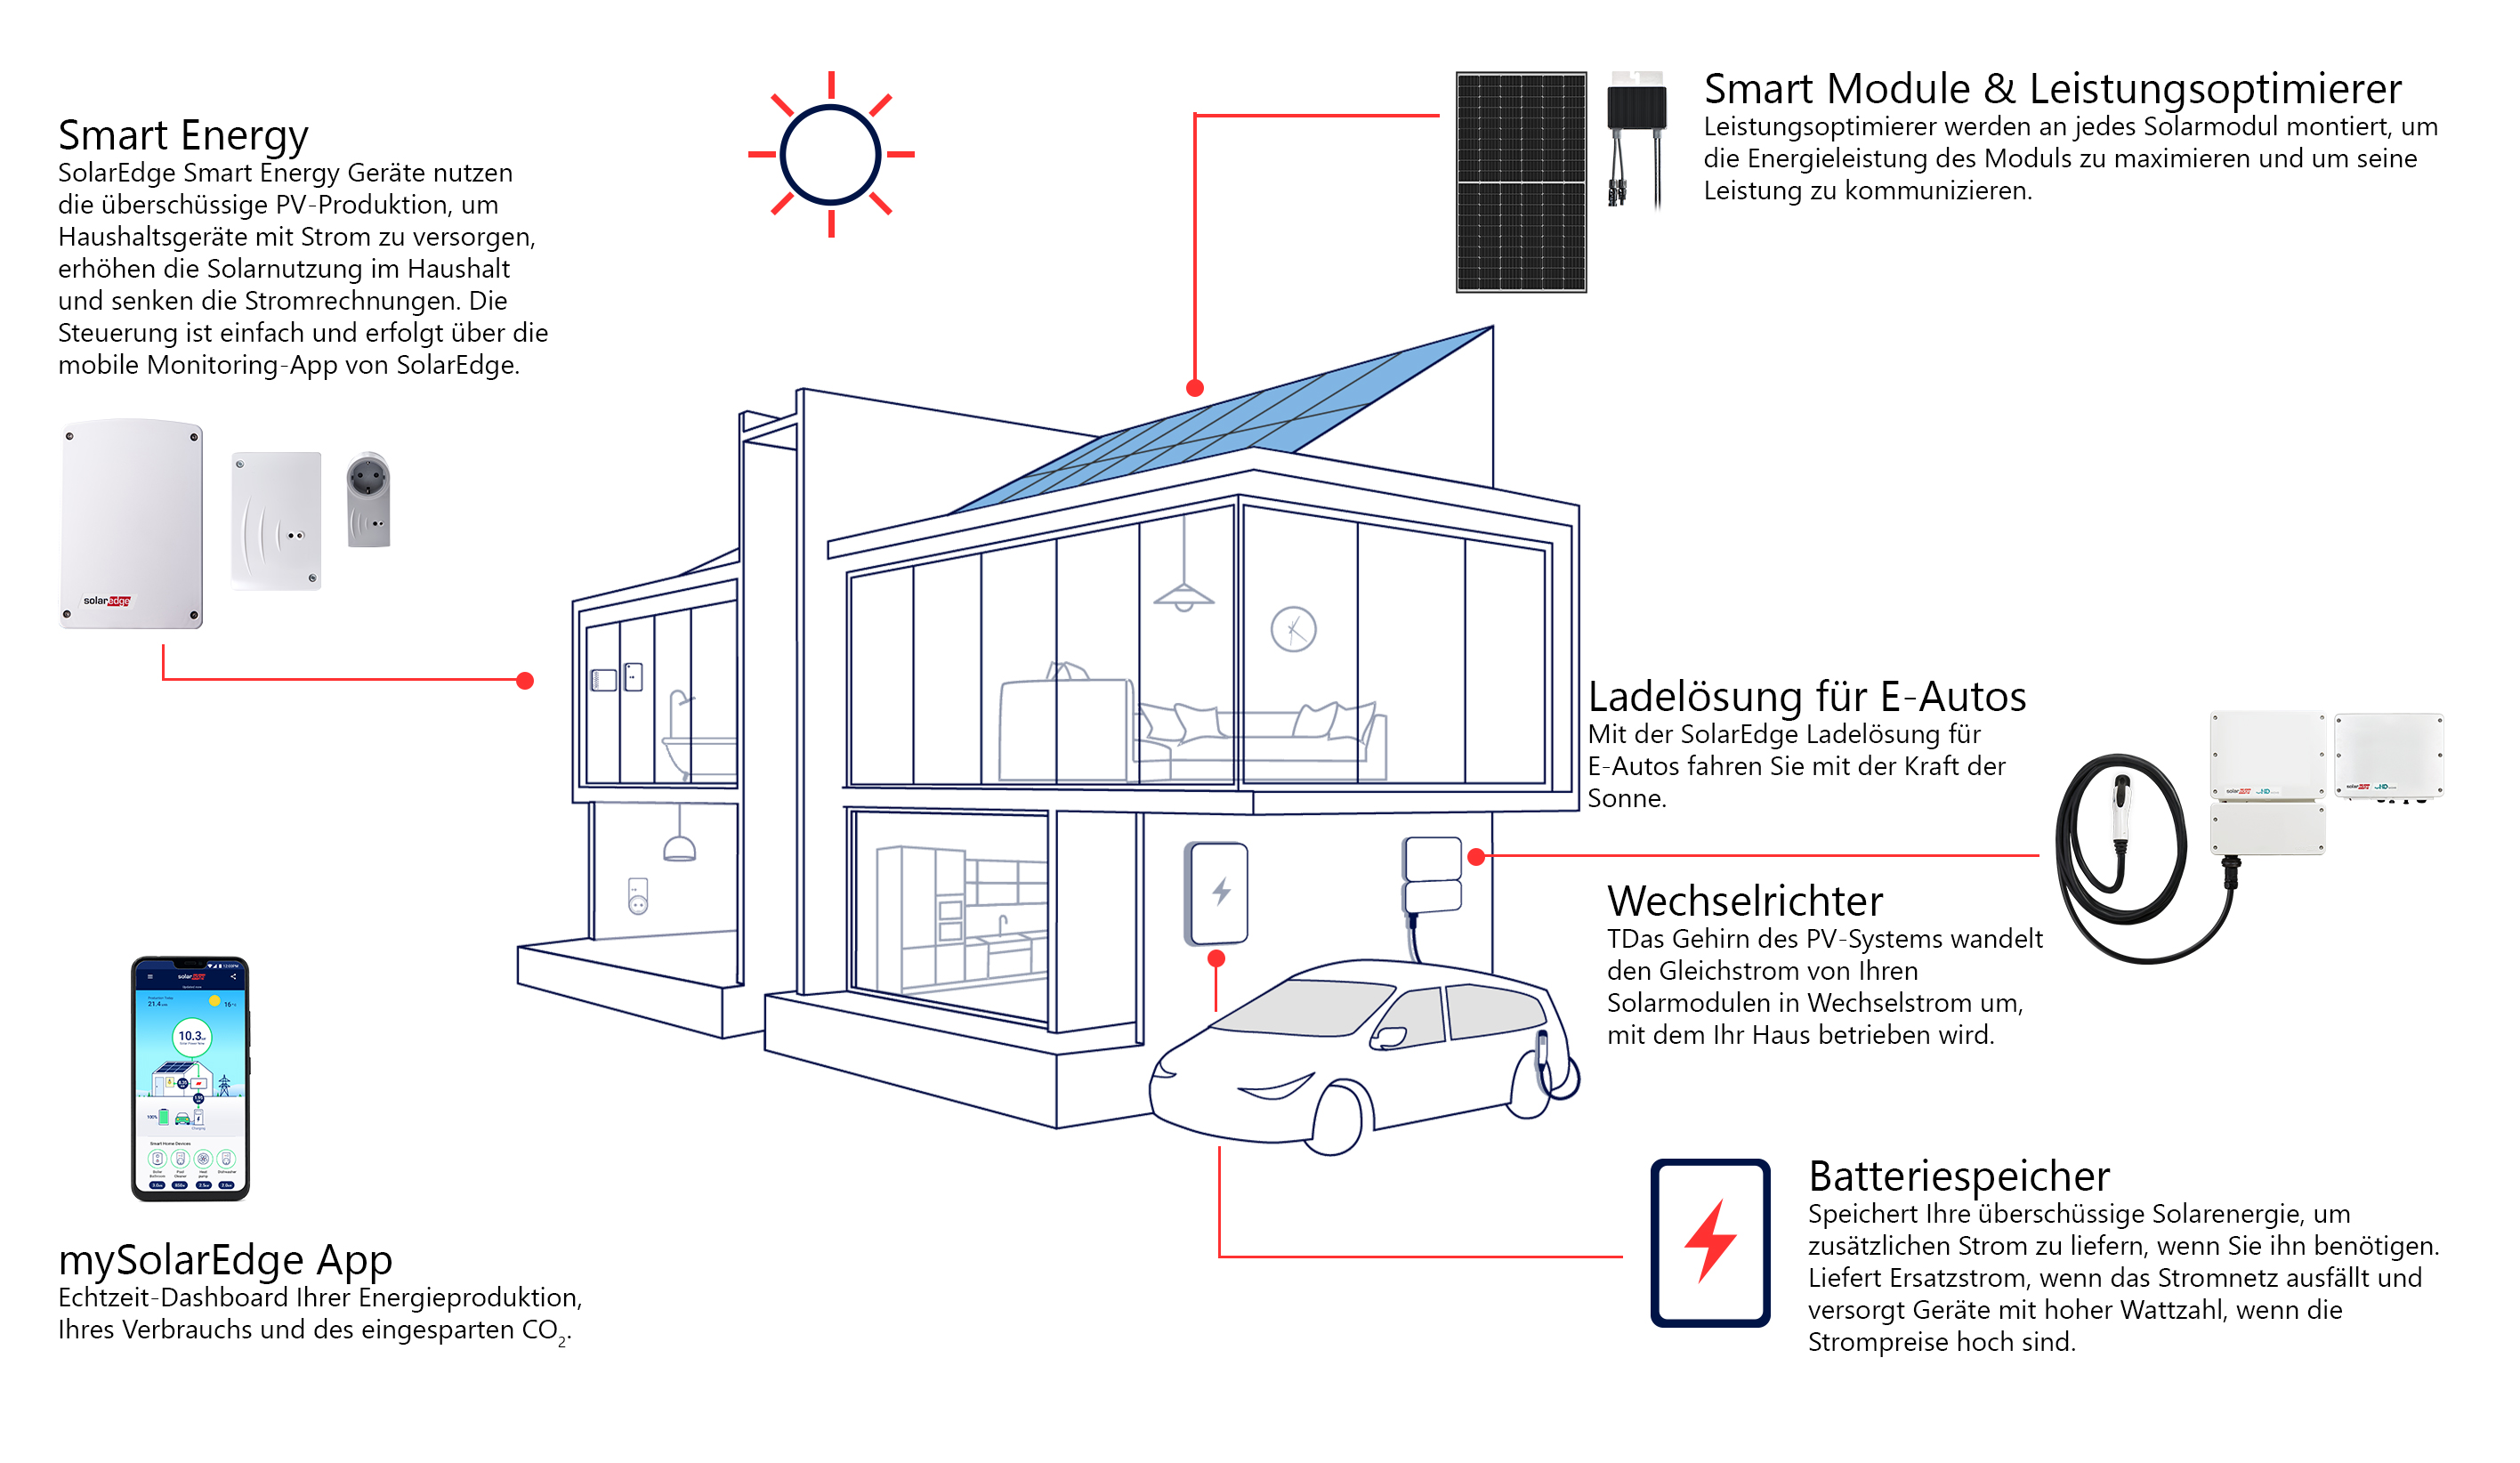 Introducing Your SolarEdge System